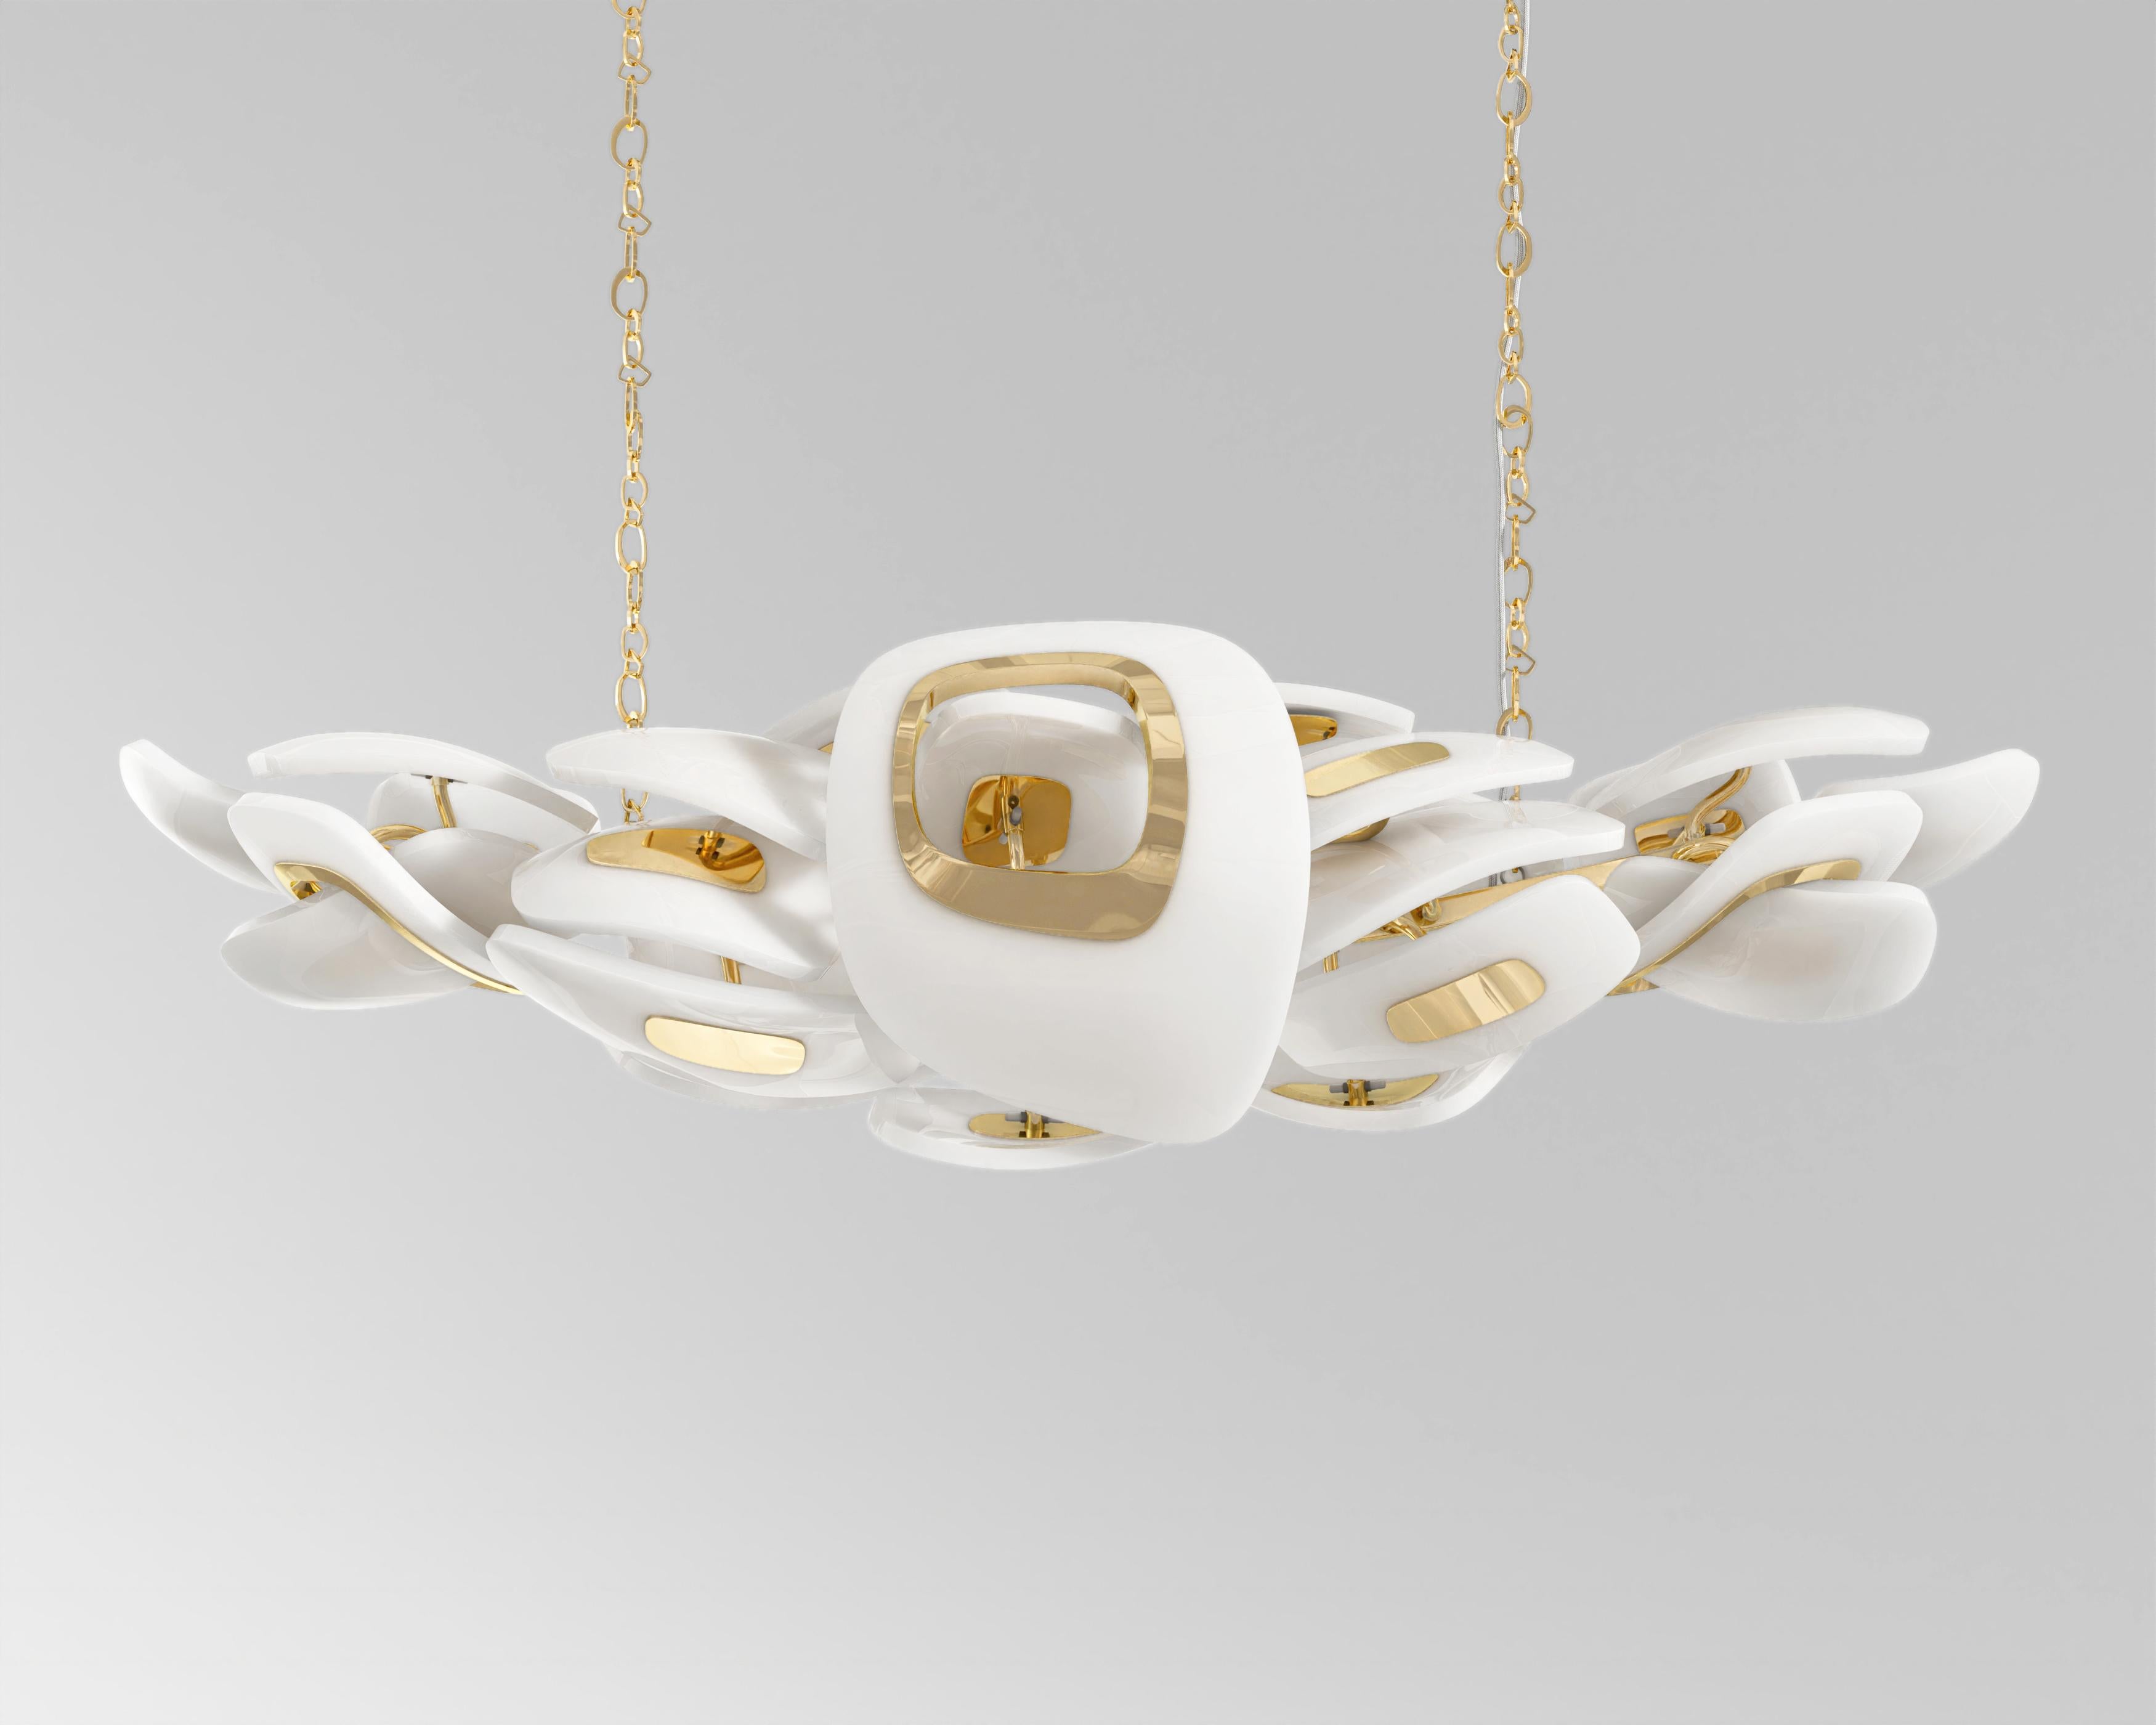 Swan Polished Bronze
Introducing the exquisite “Swan” chandelier, a masterpiece of opulence and craftsmanship that transcends mere lighting to become a true work of art. Handcrafted with unparalleled precision and attention to detail, the Swan